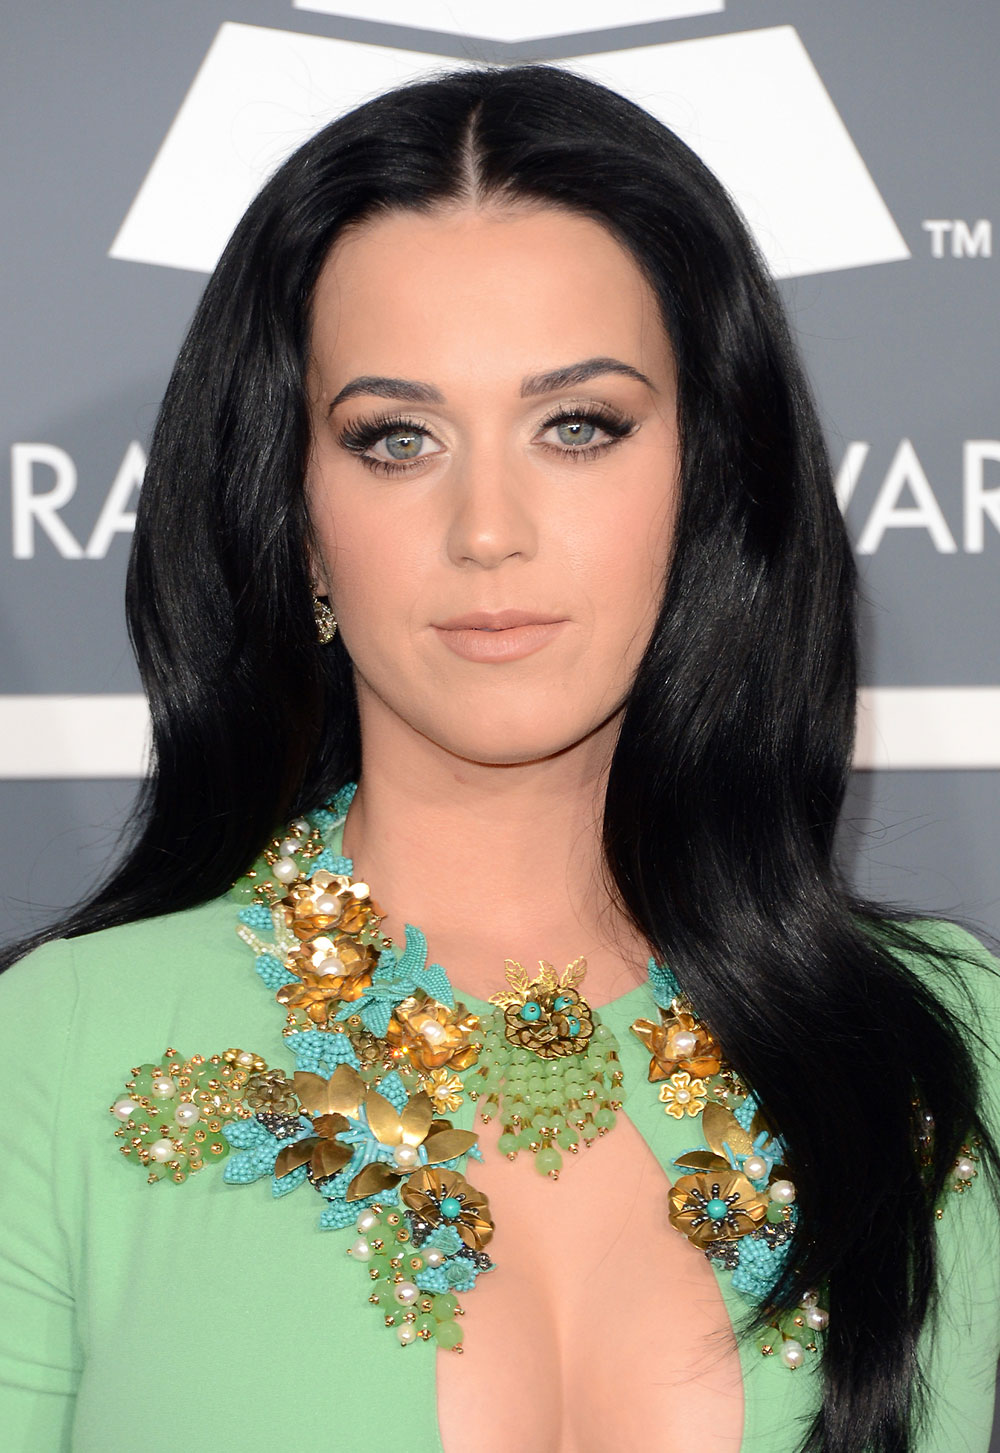 Get Katy Perry’s Hair and Makeup at 2013 Grammy Awards.